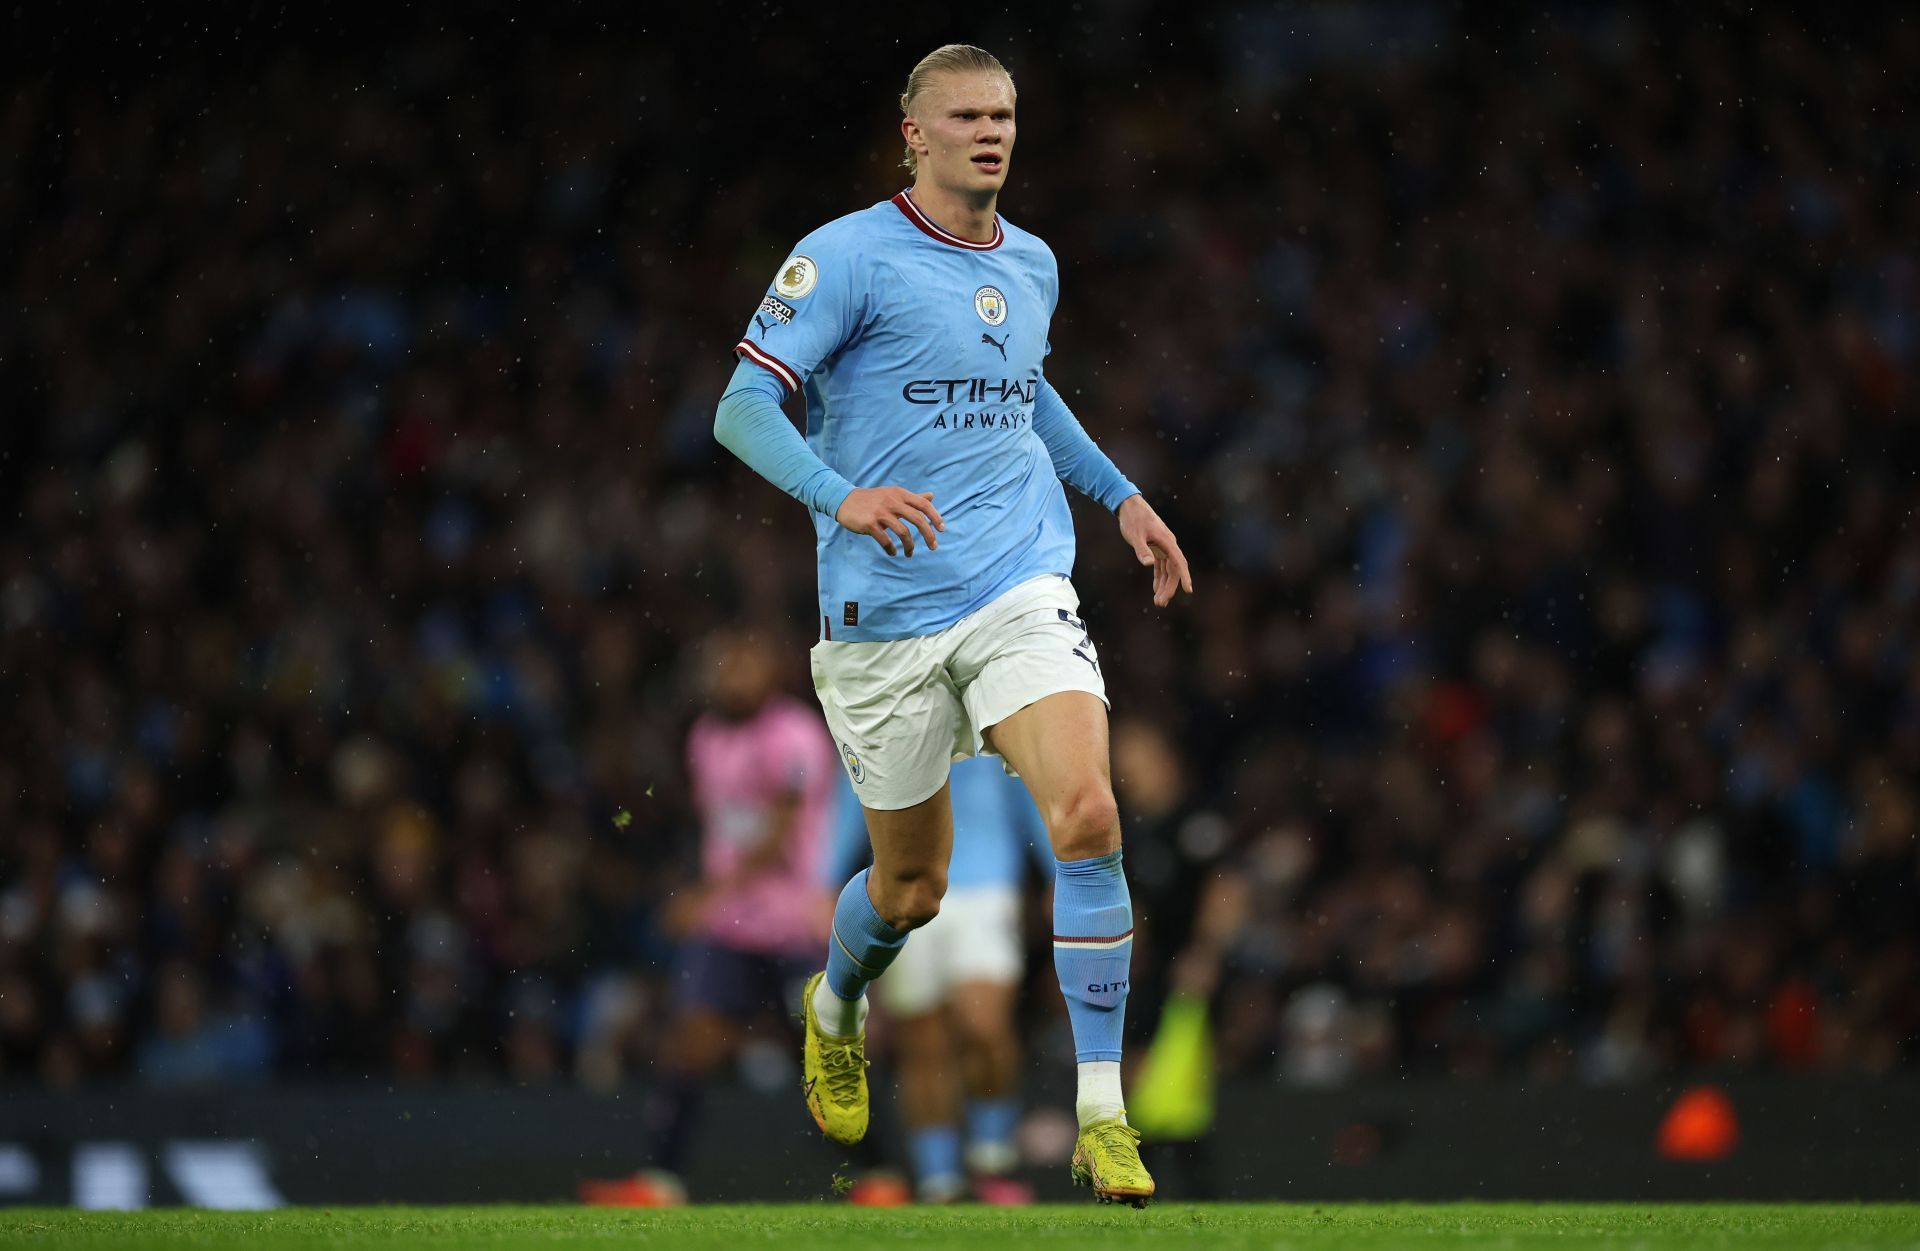 The Norwegian has been in sensational form for Manchester City this season